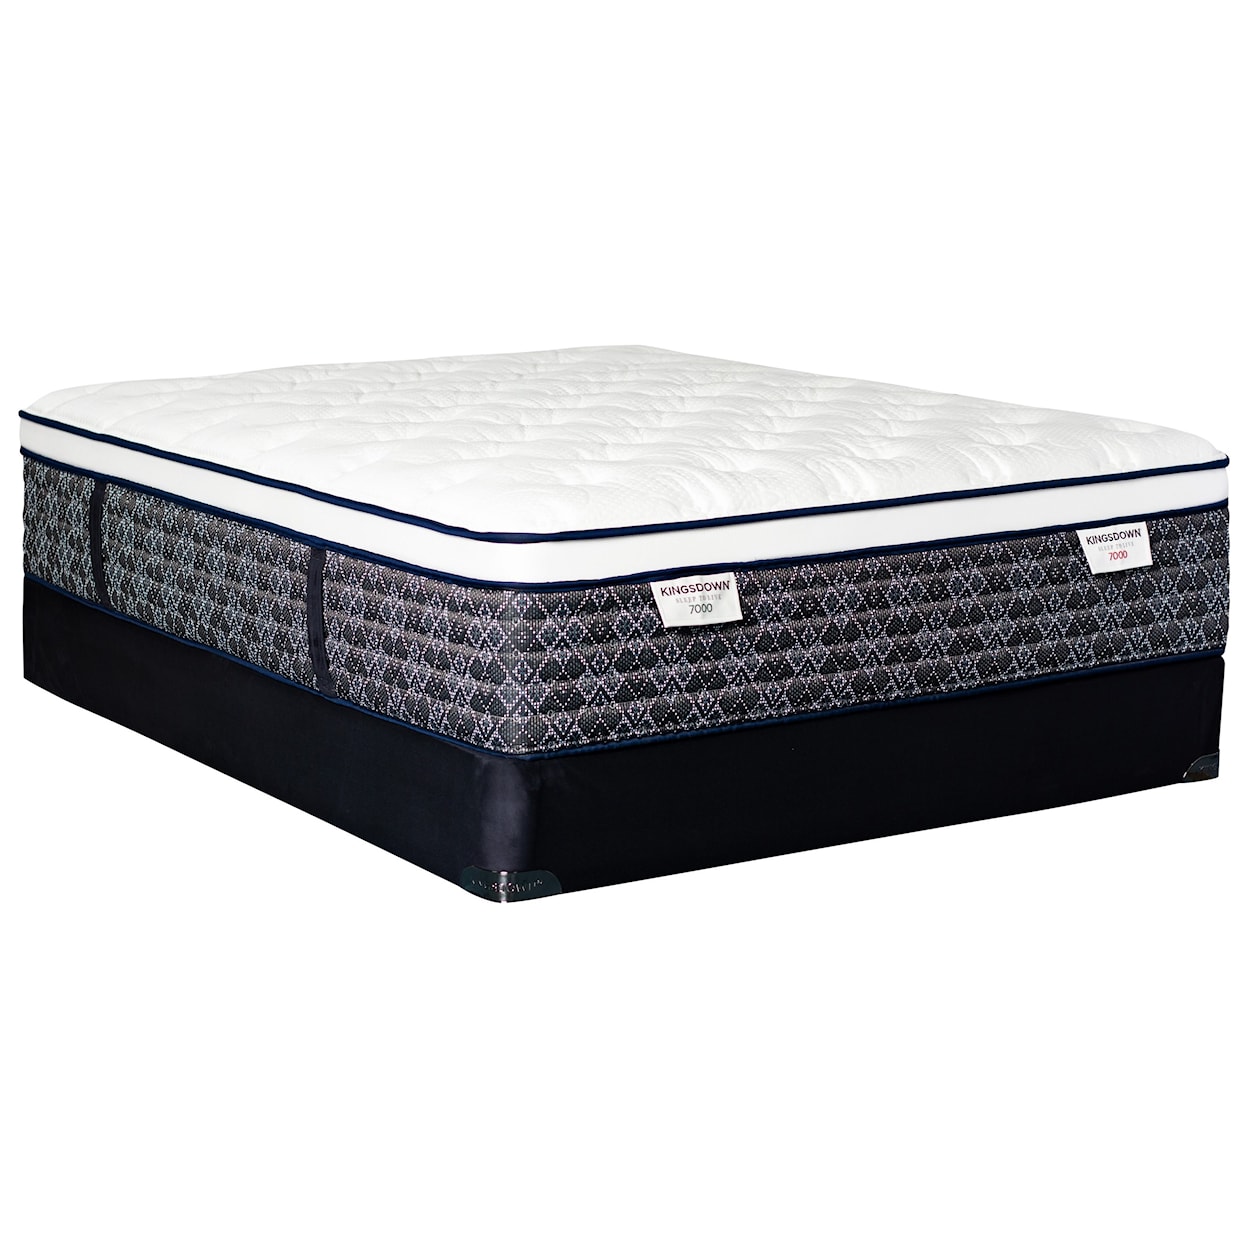 Kingsdown Sleep to Live 7000 Gold Blue ET Twin Pocketed Coil Mattress LoPro Set